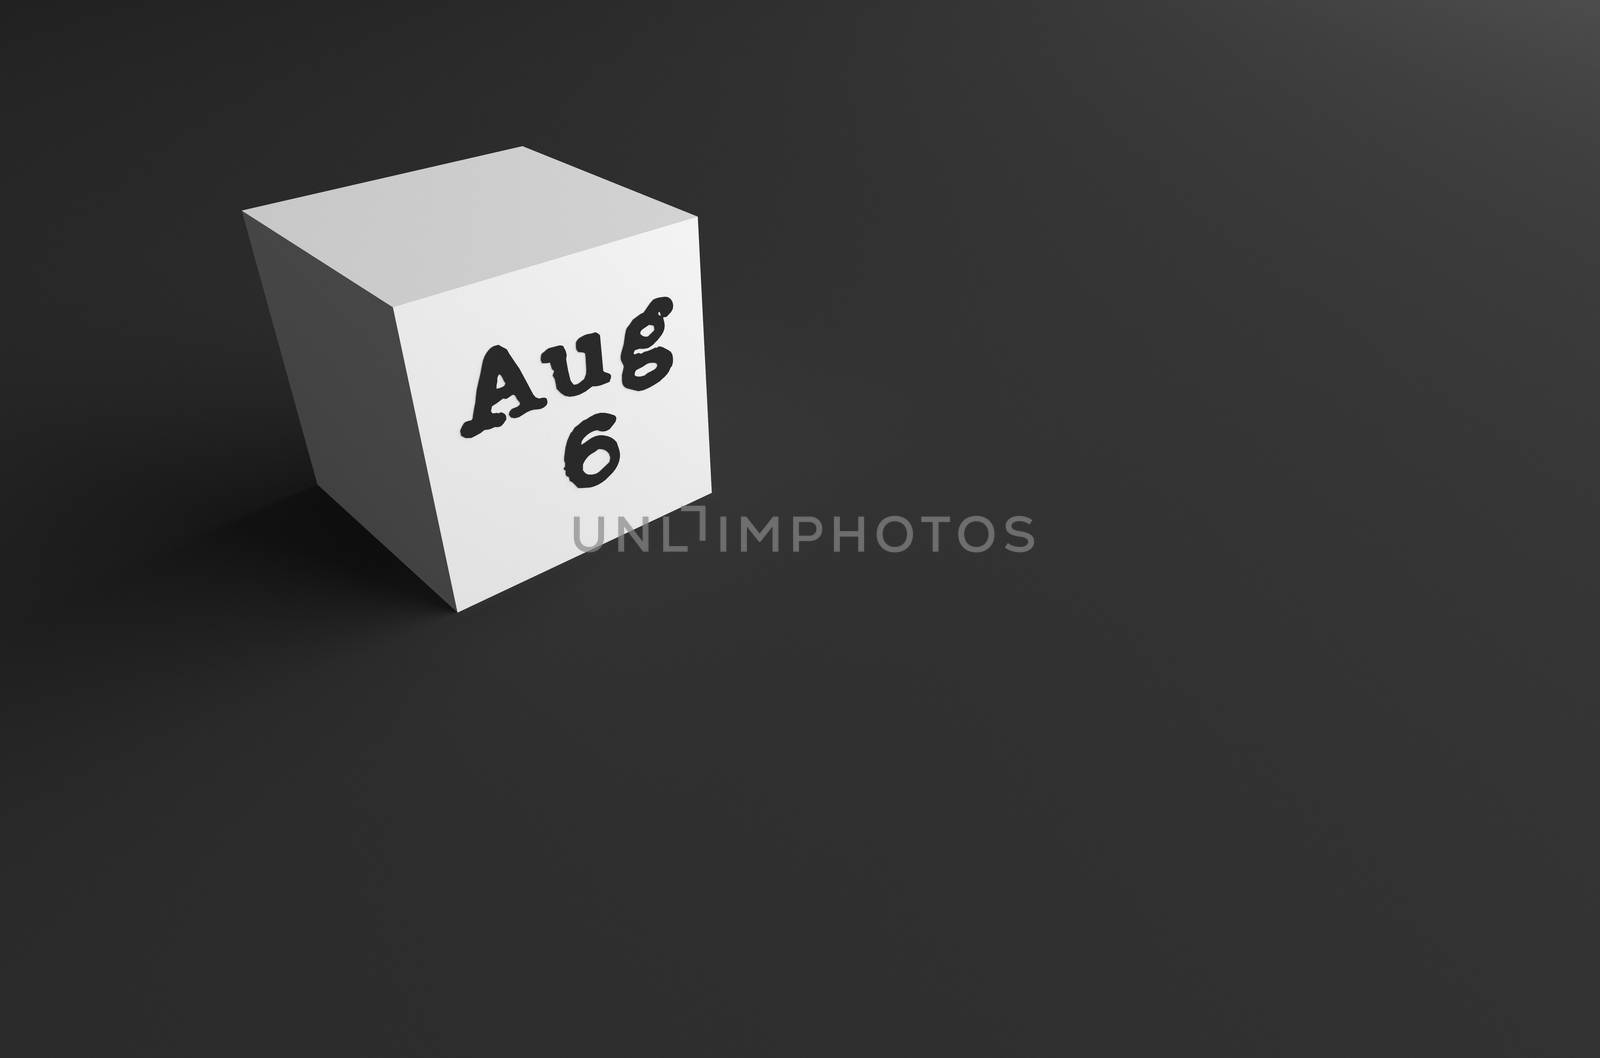 3D RENDERING OF Aug (ABBREVIATION OF AUGUST) 6 ON WHITE CUBE